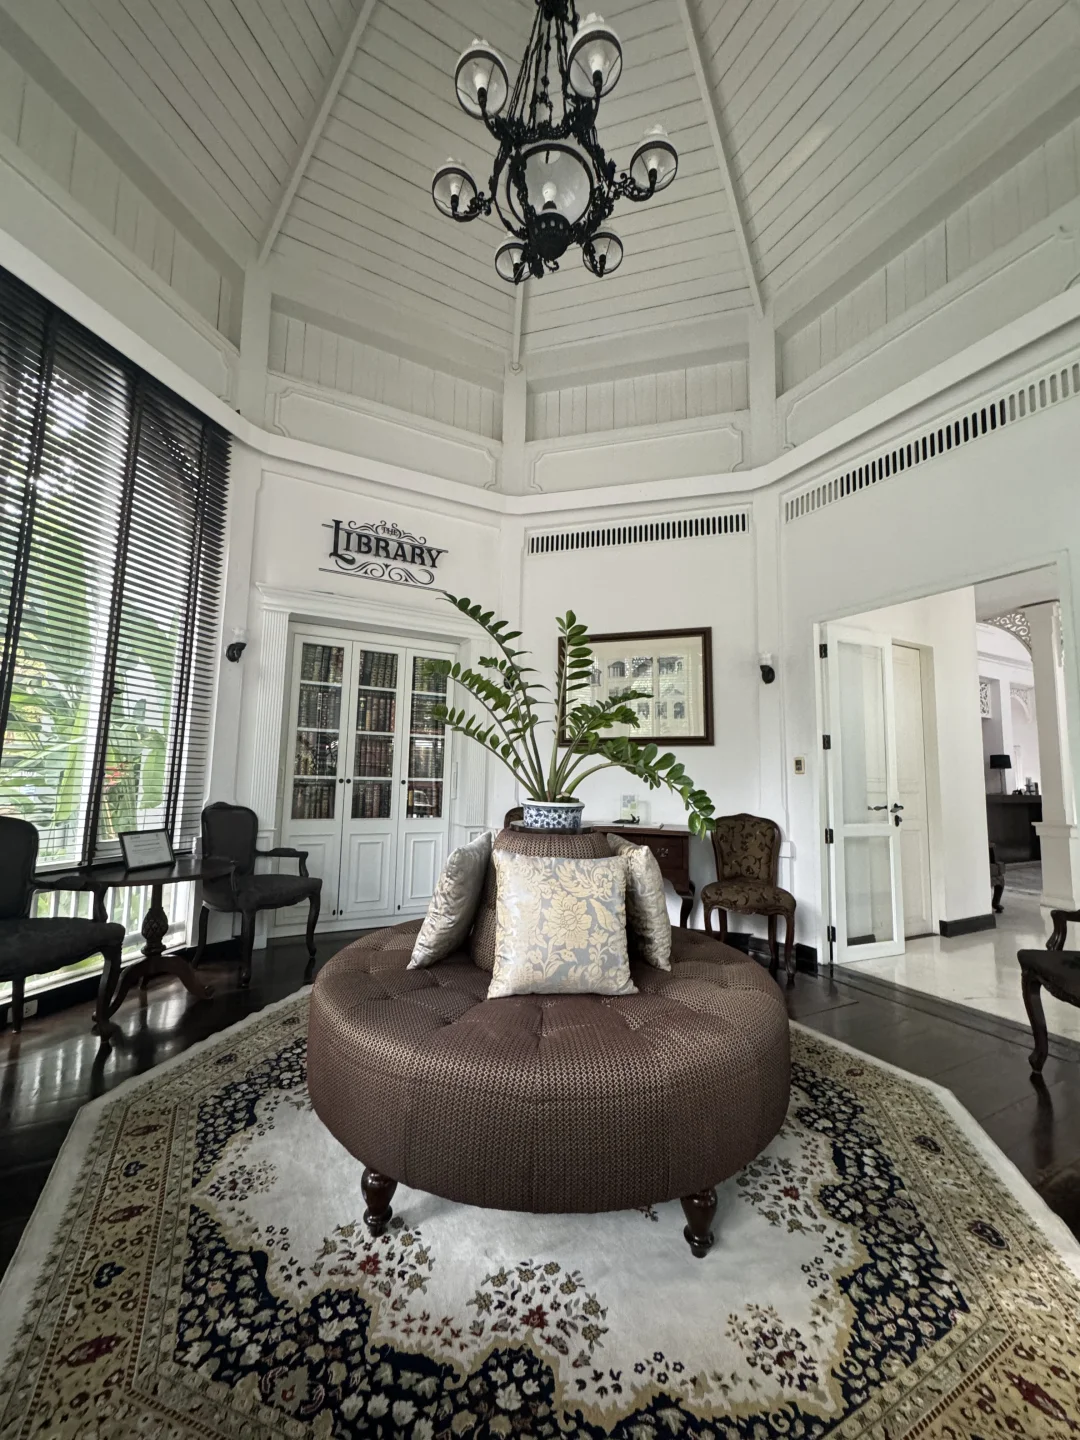 ChiangMai-Ping Nakara Boutique Hotel & Spa, located in the heart of Chiang Mai's ancient city